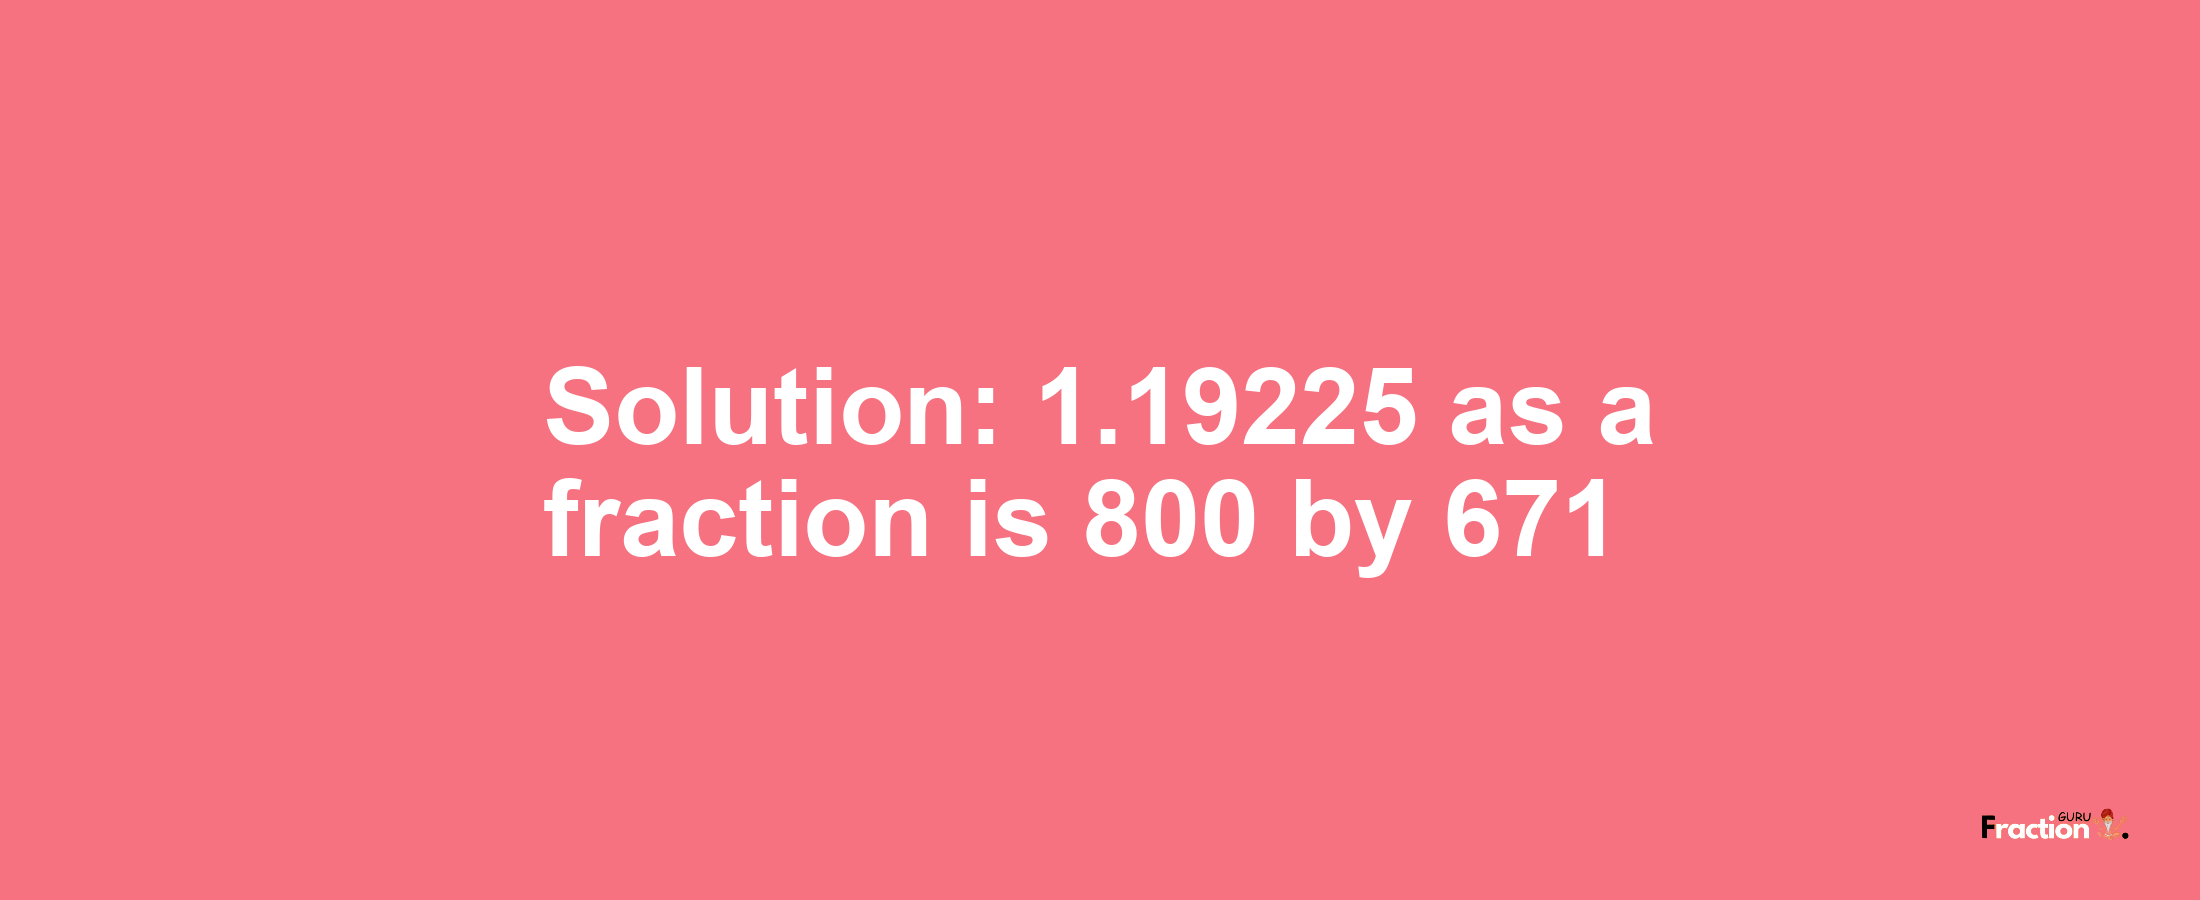 Solution:1.19225 as a fraction is 800/671